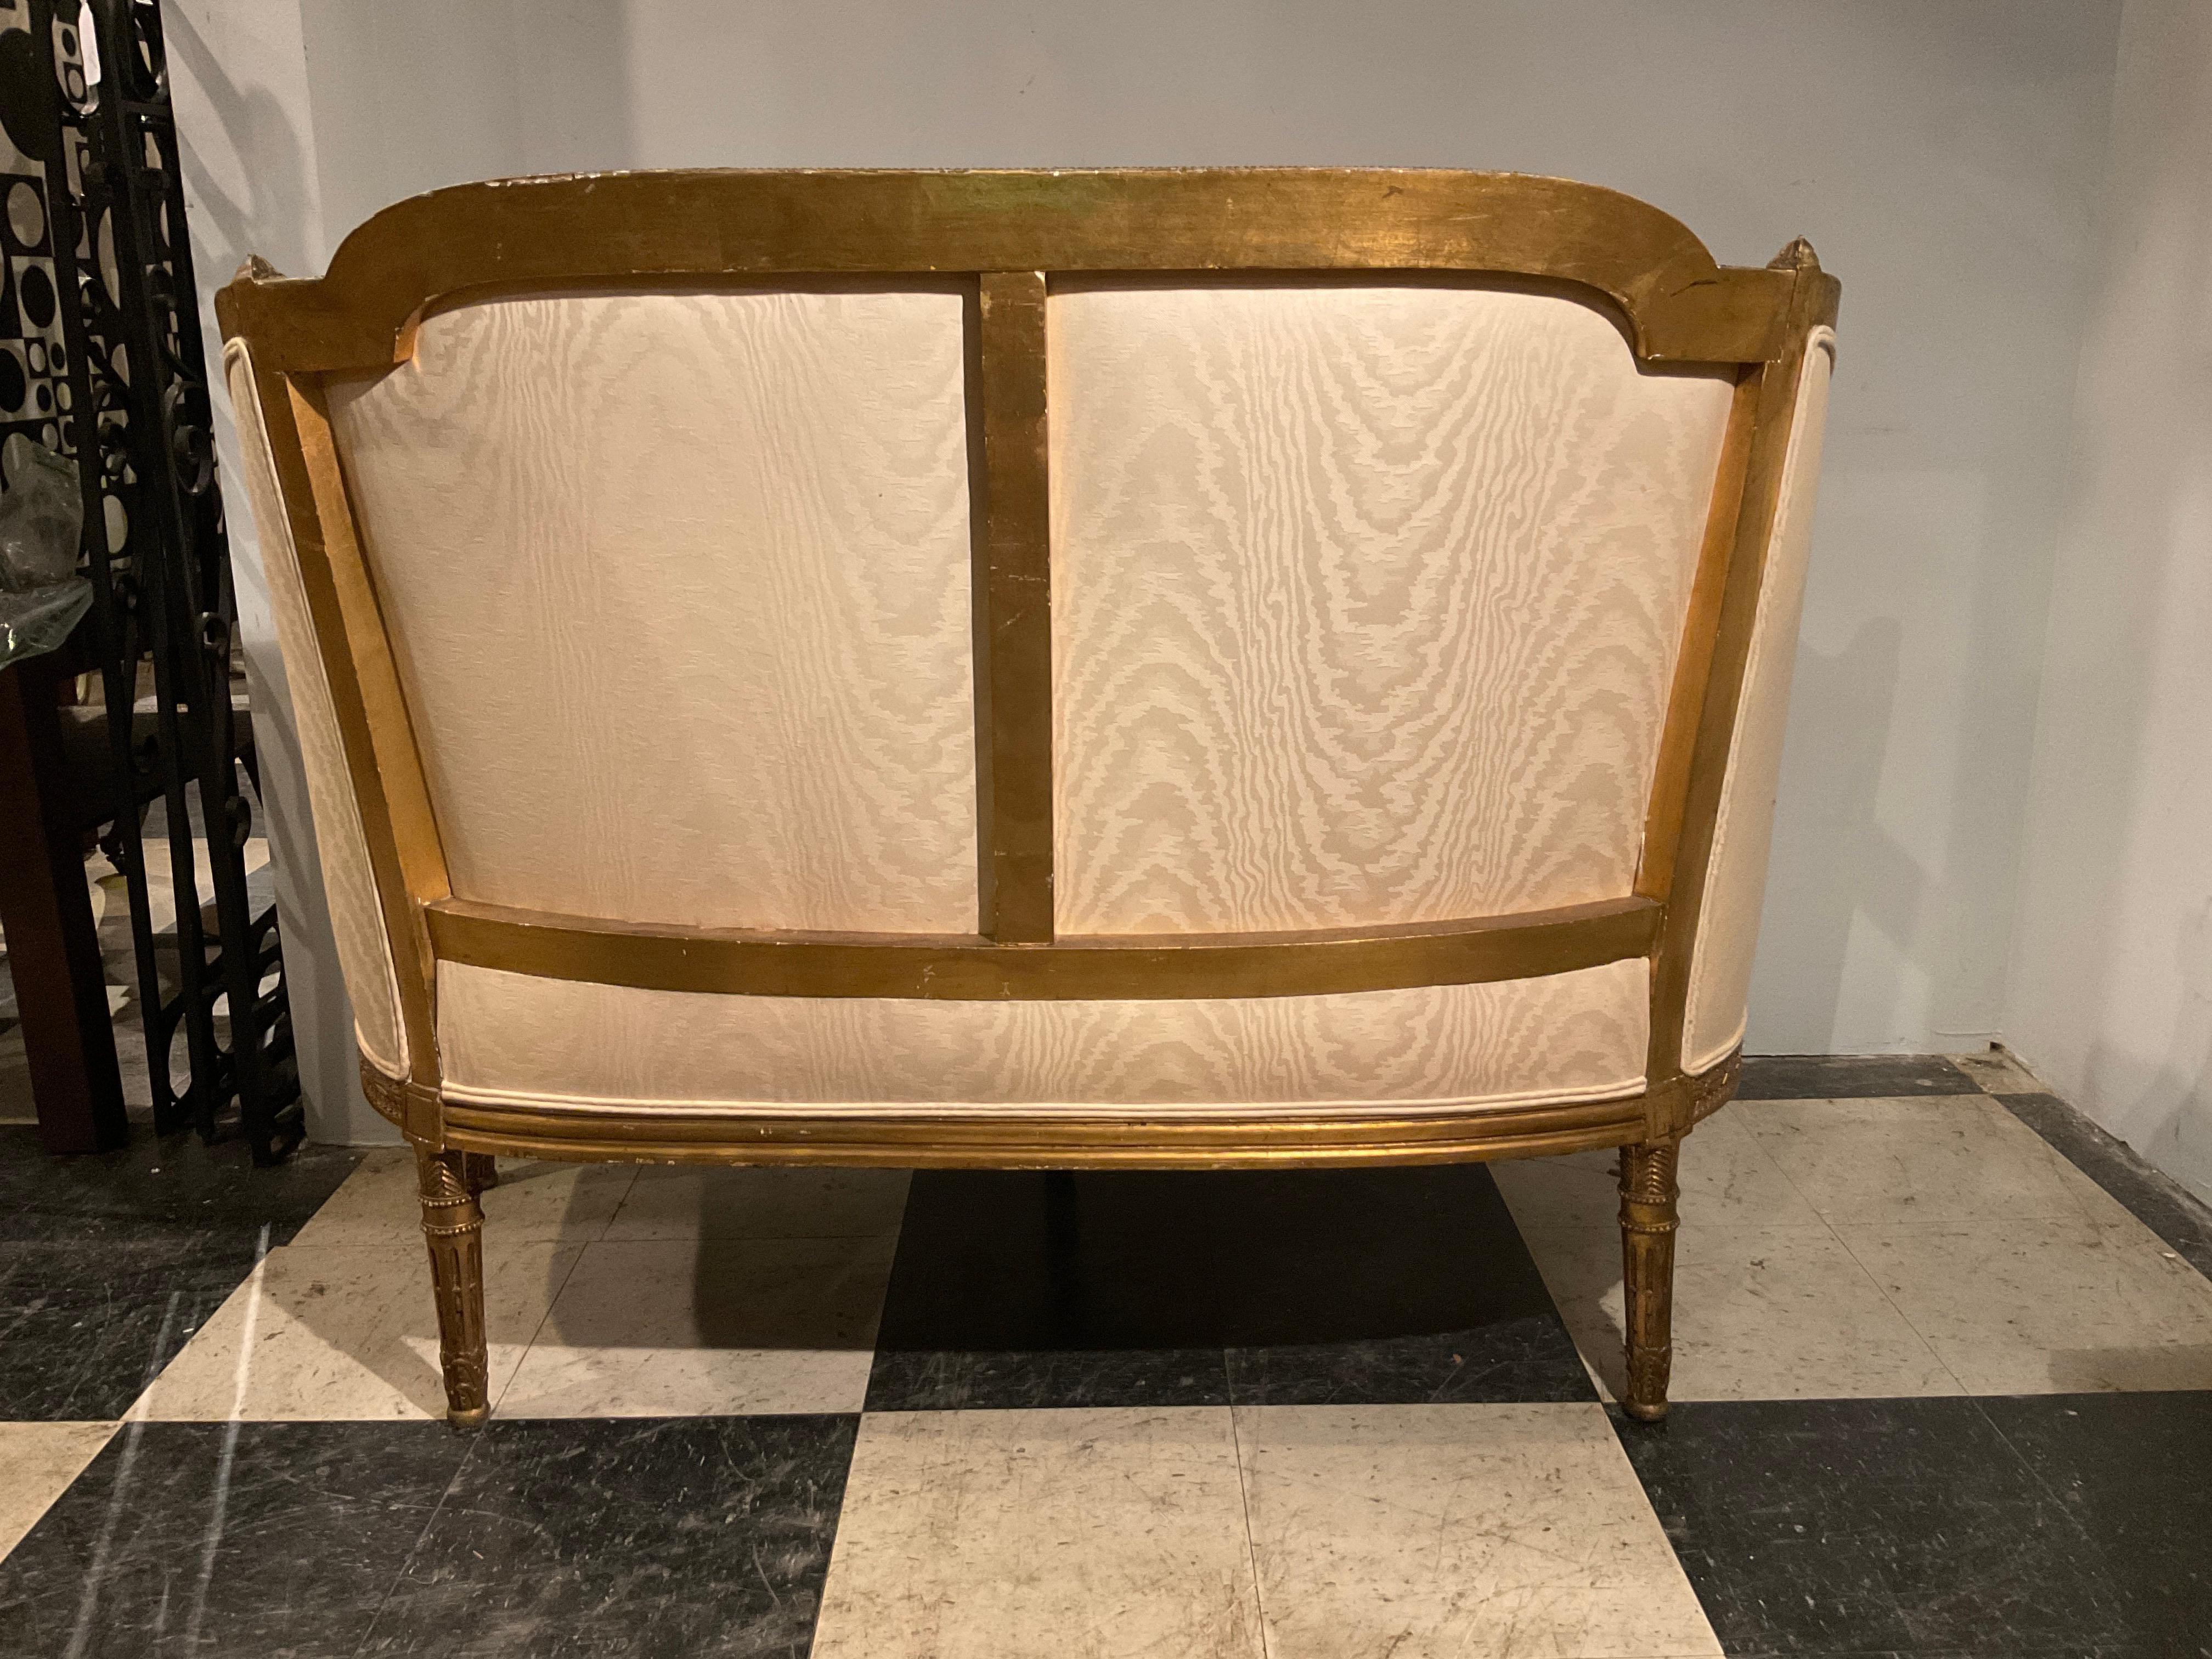 1870 s French Gilt Wood Louis XVI Settee For Sale 1